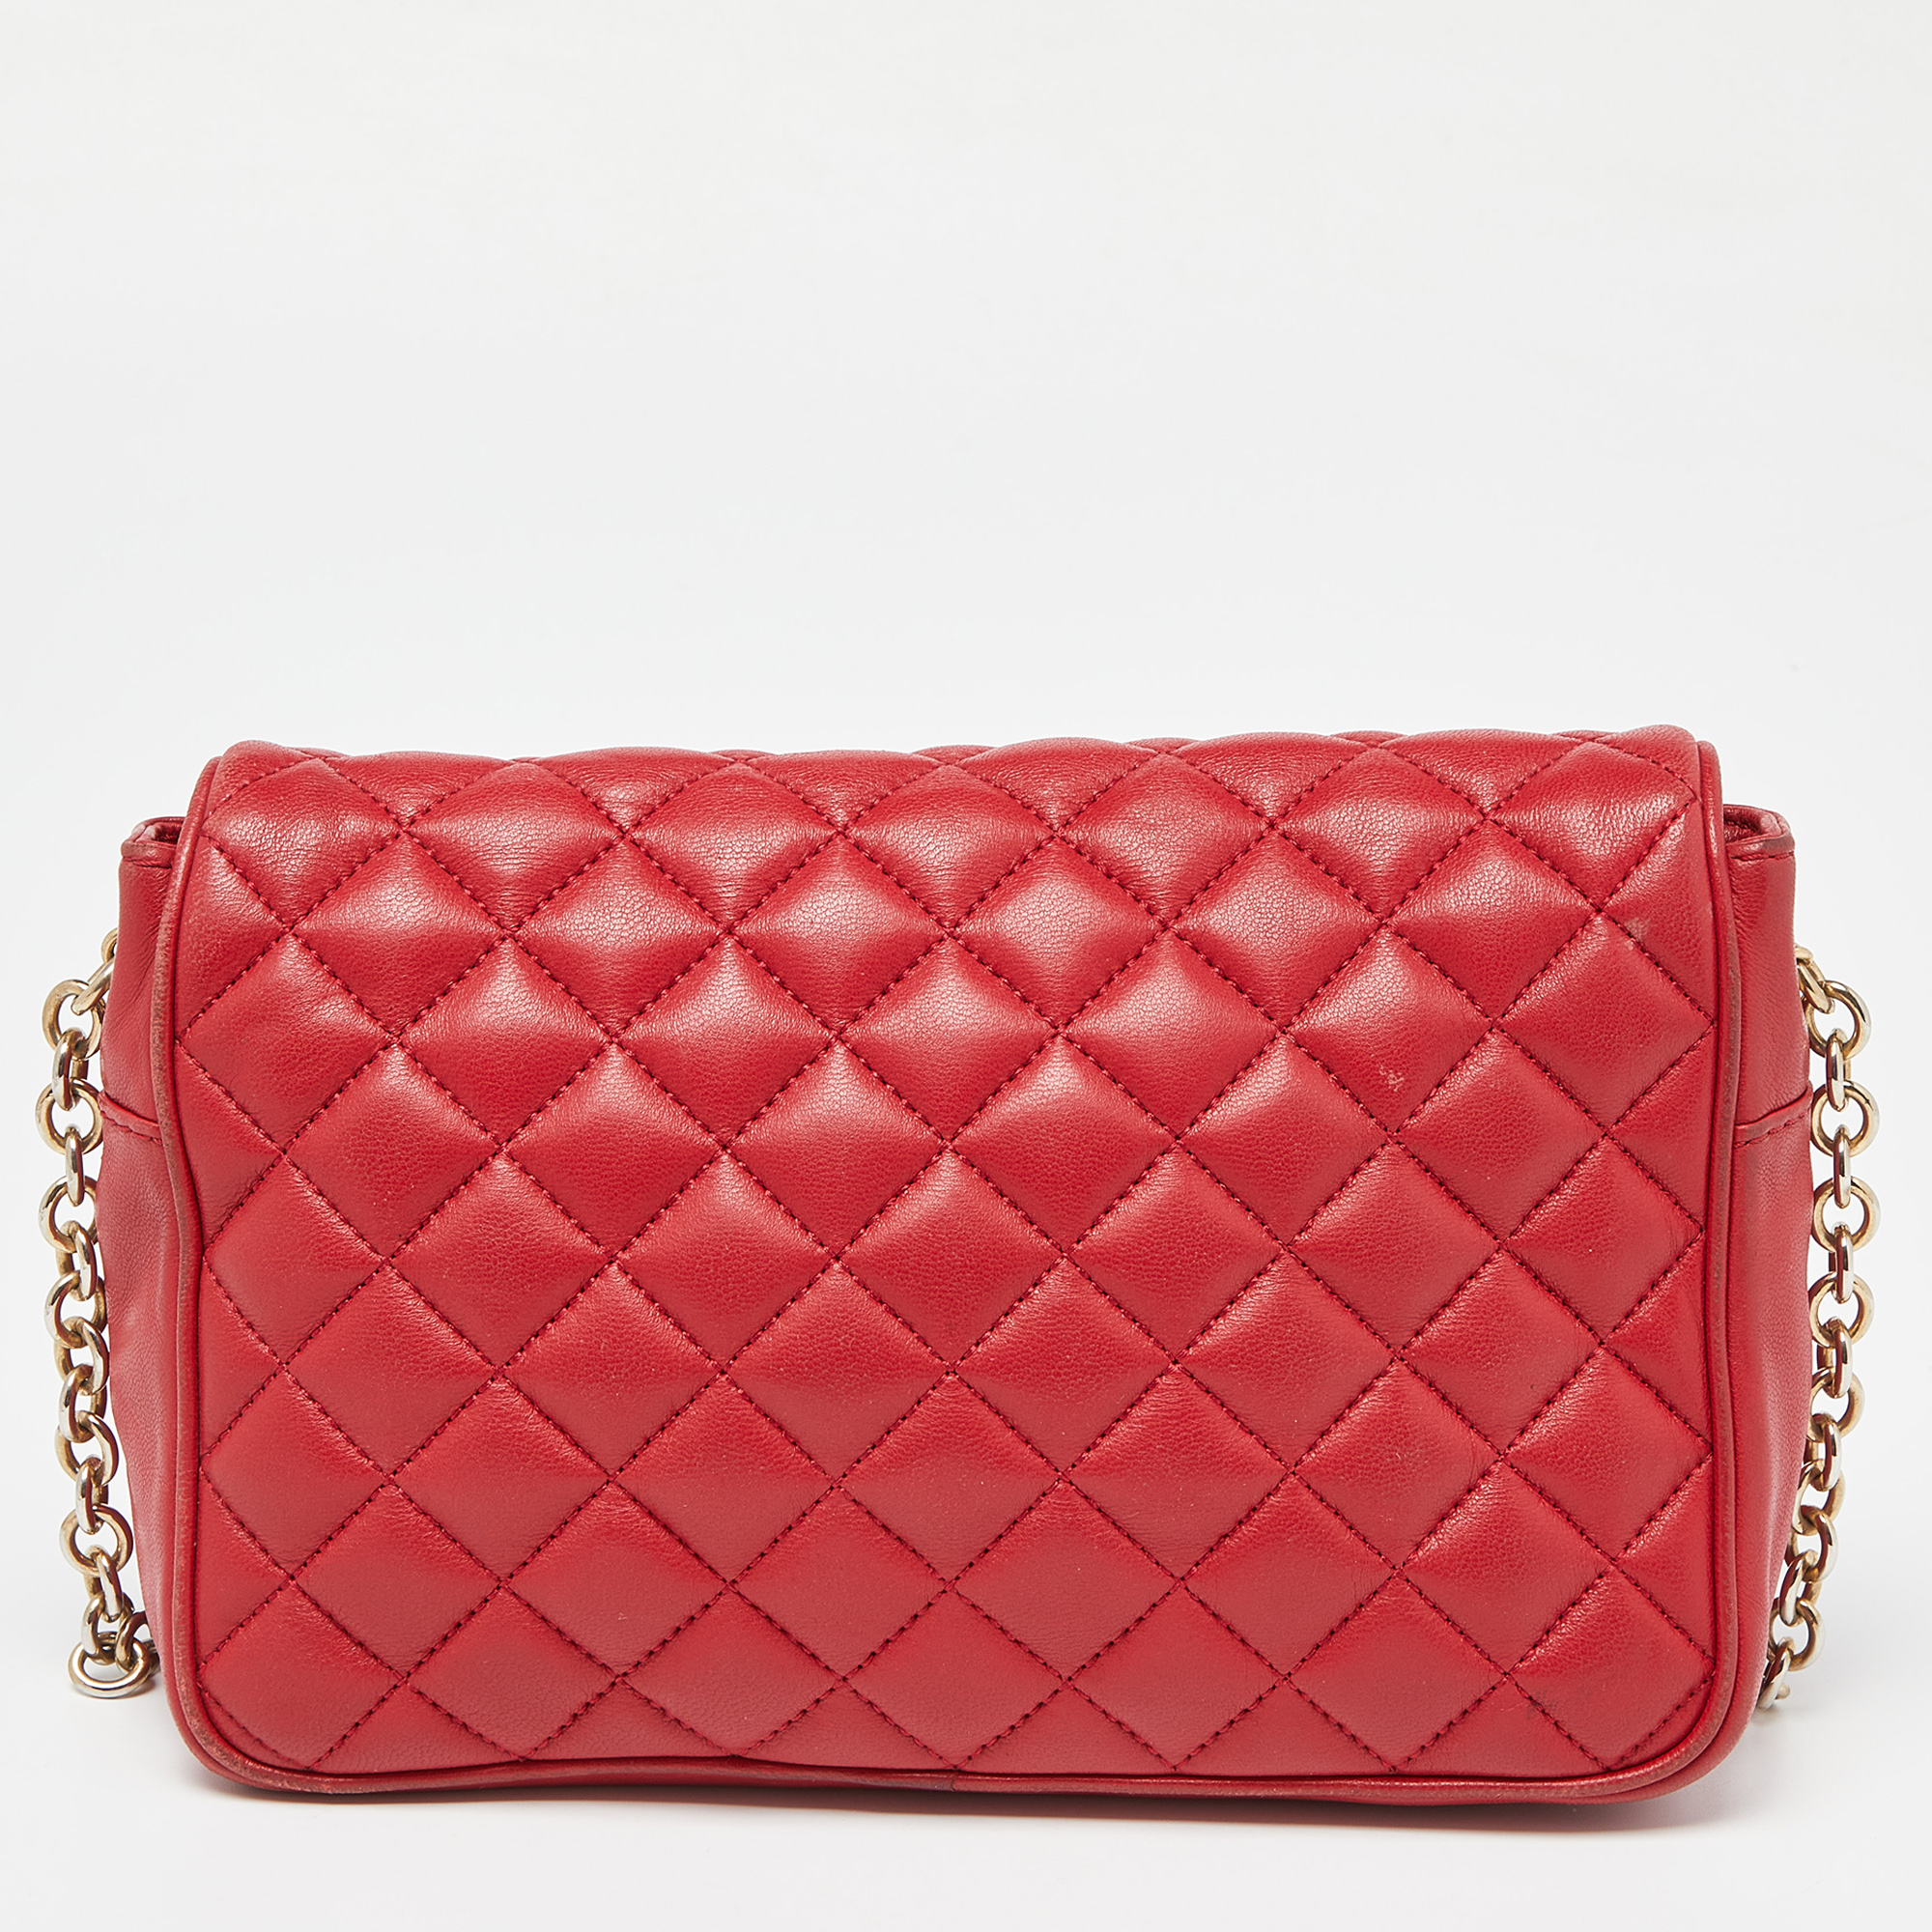 CH Carolina Herrera Red Quilted Leather Chain Flap Shoulder Bag